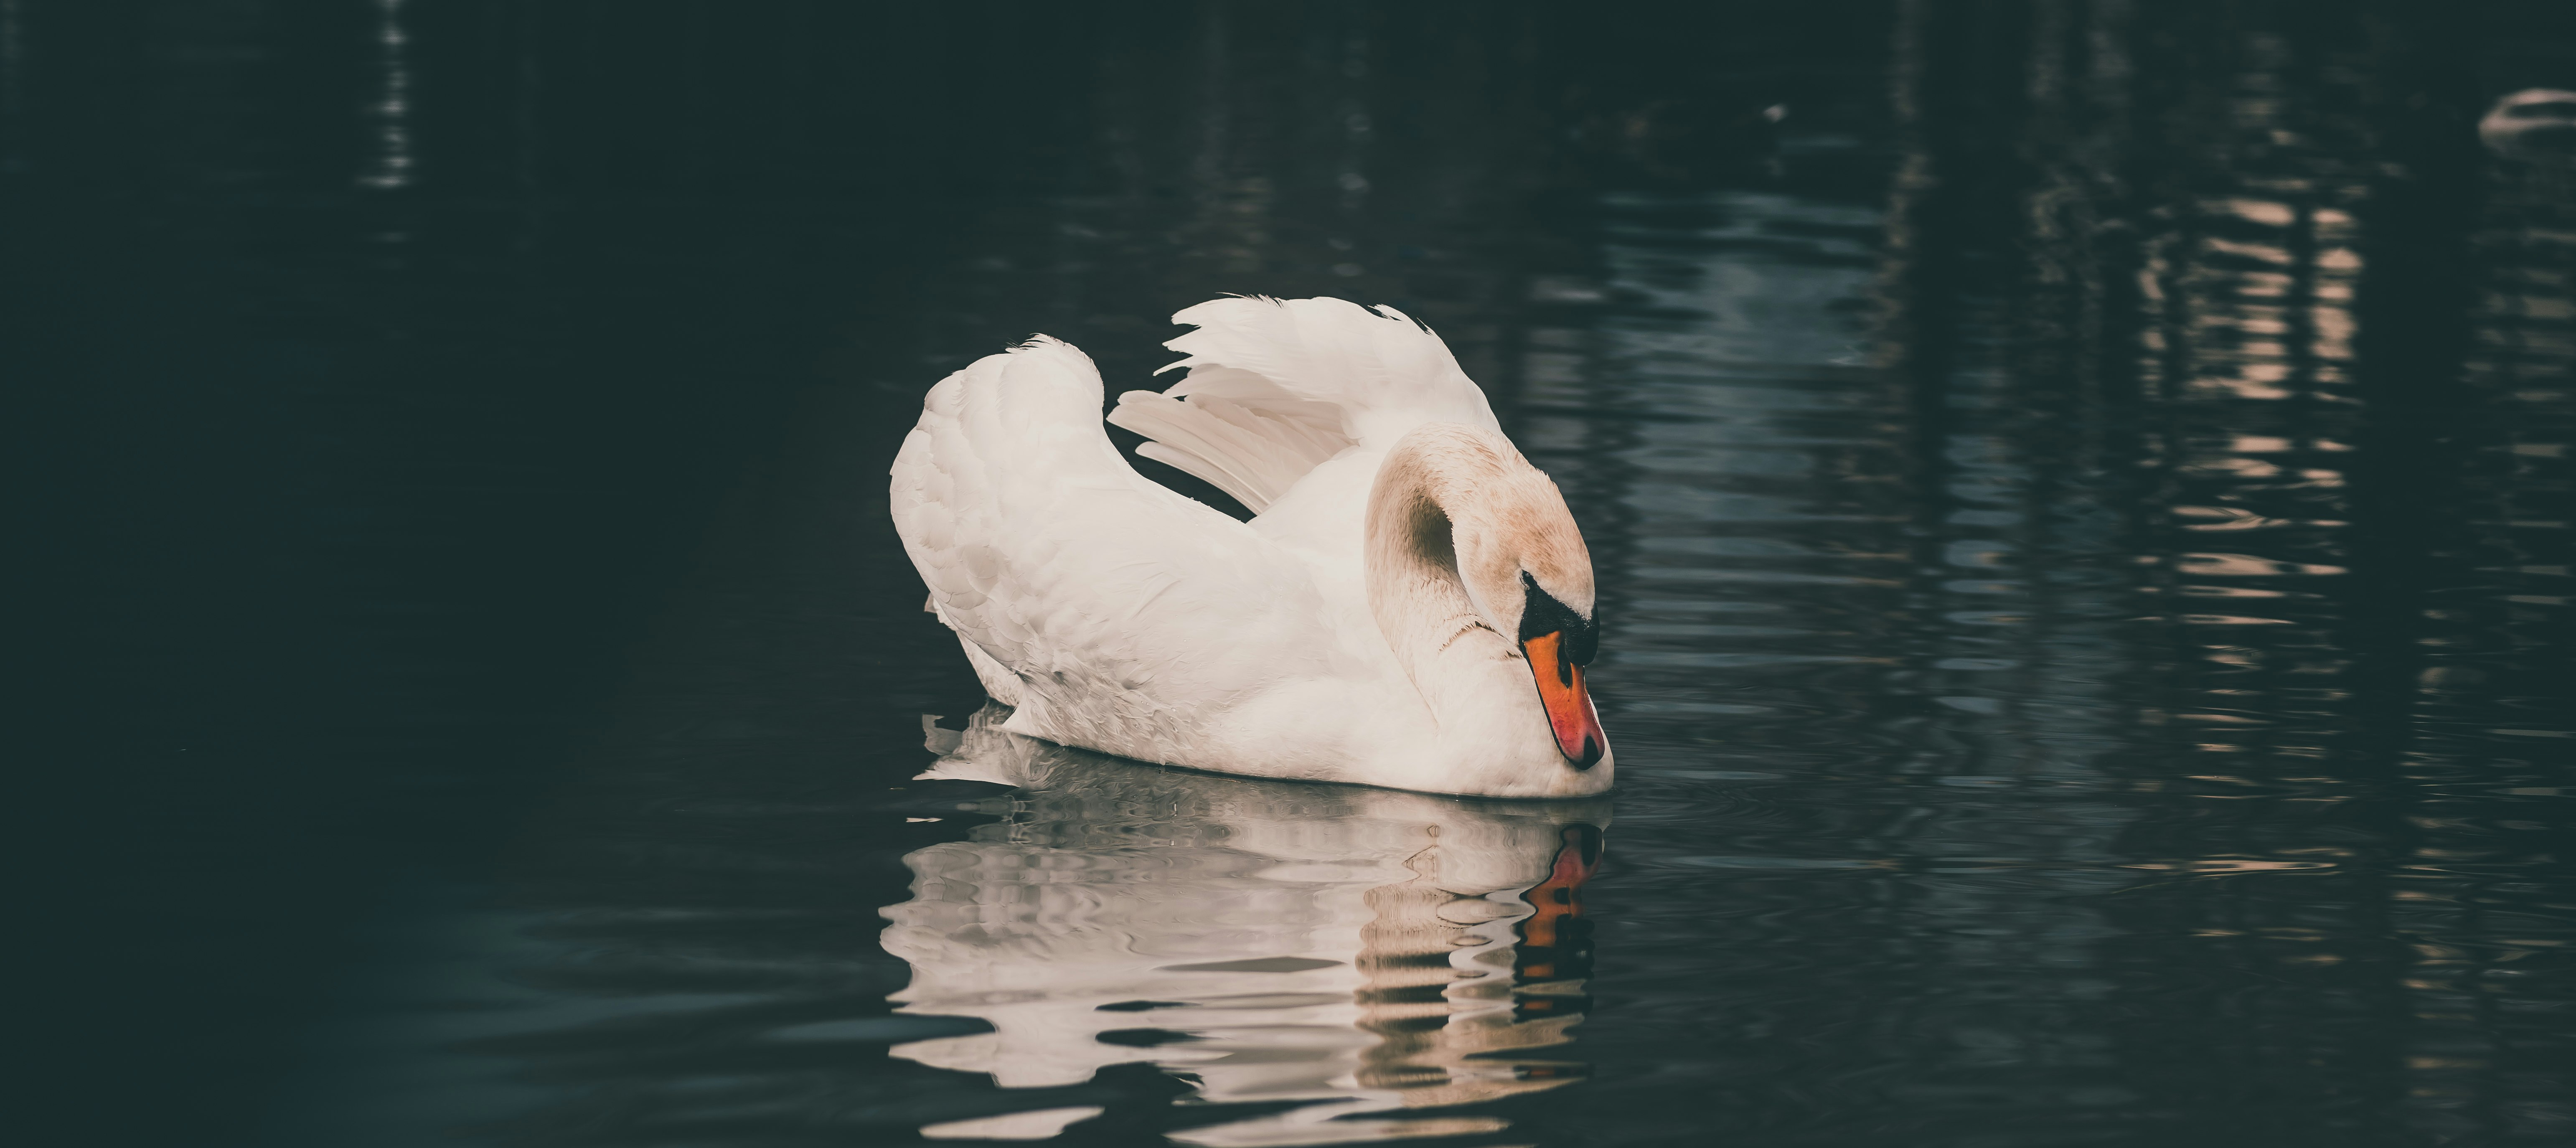 white swan reflected on body of water